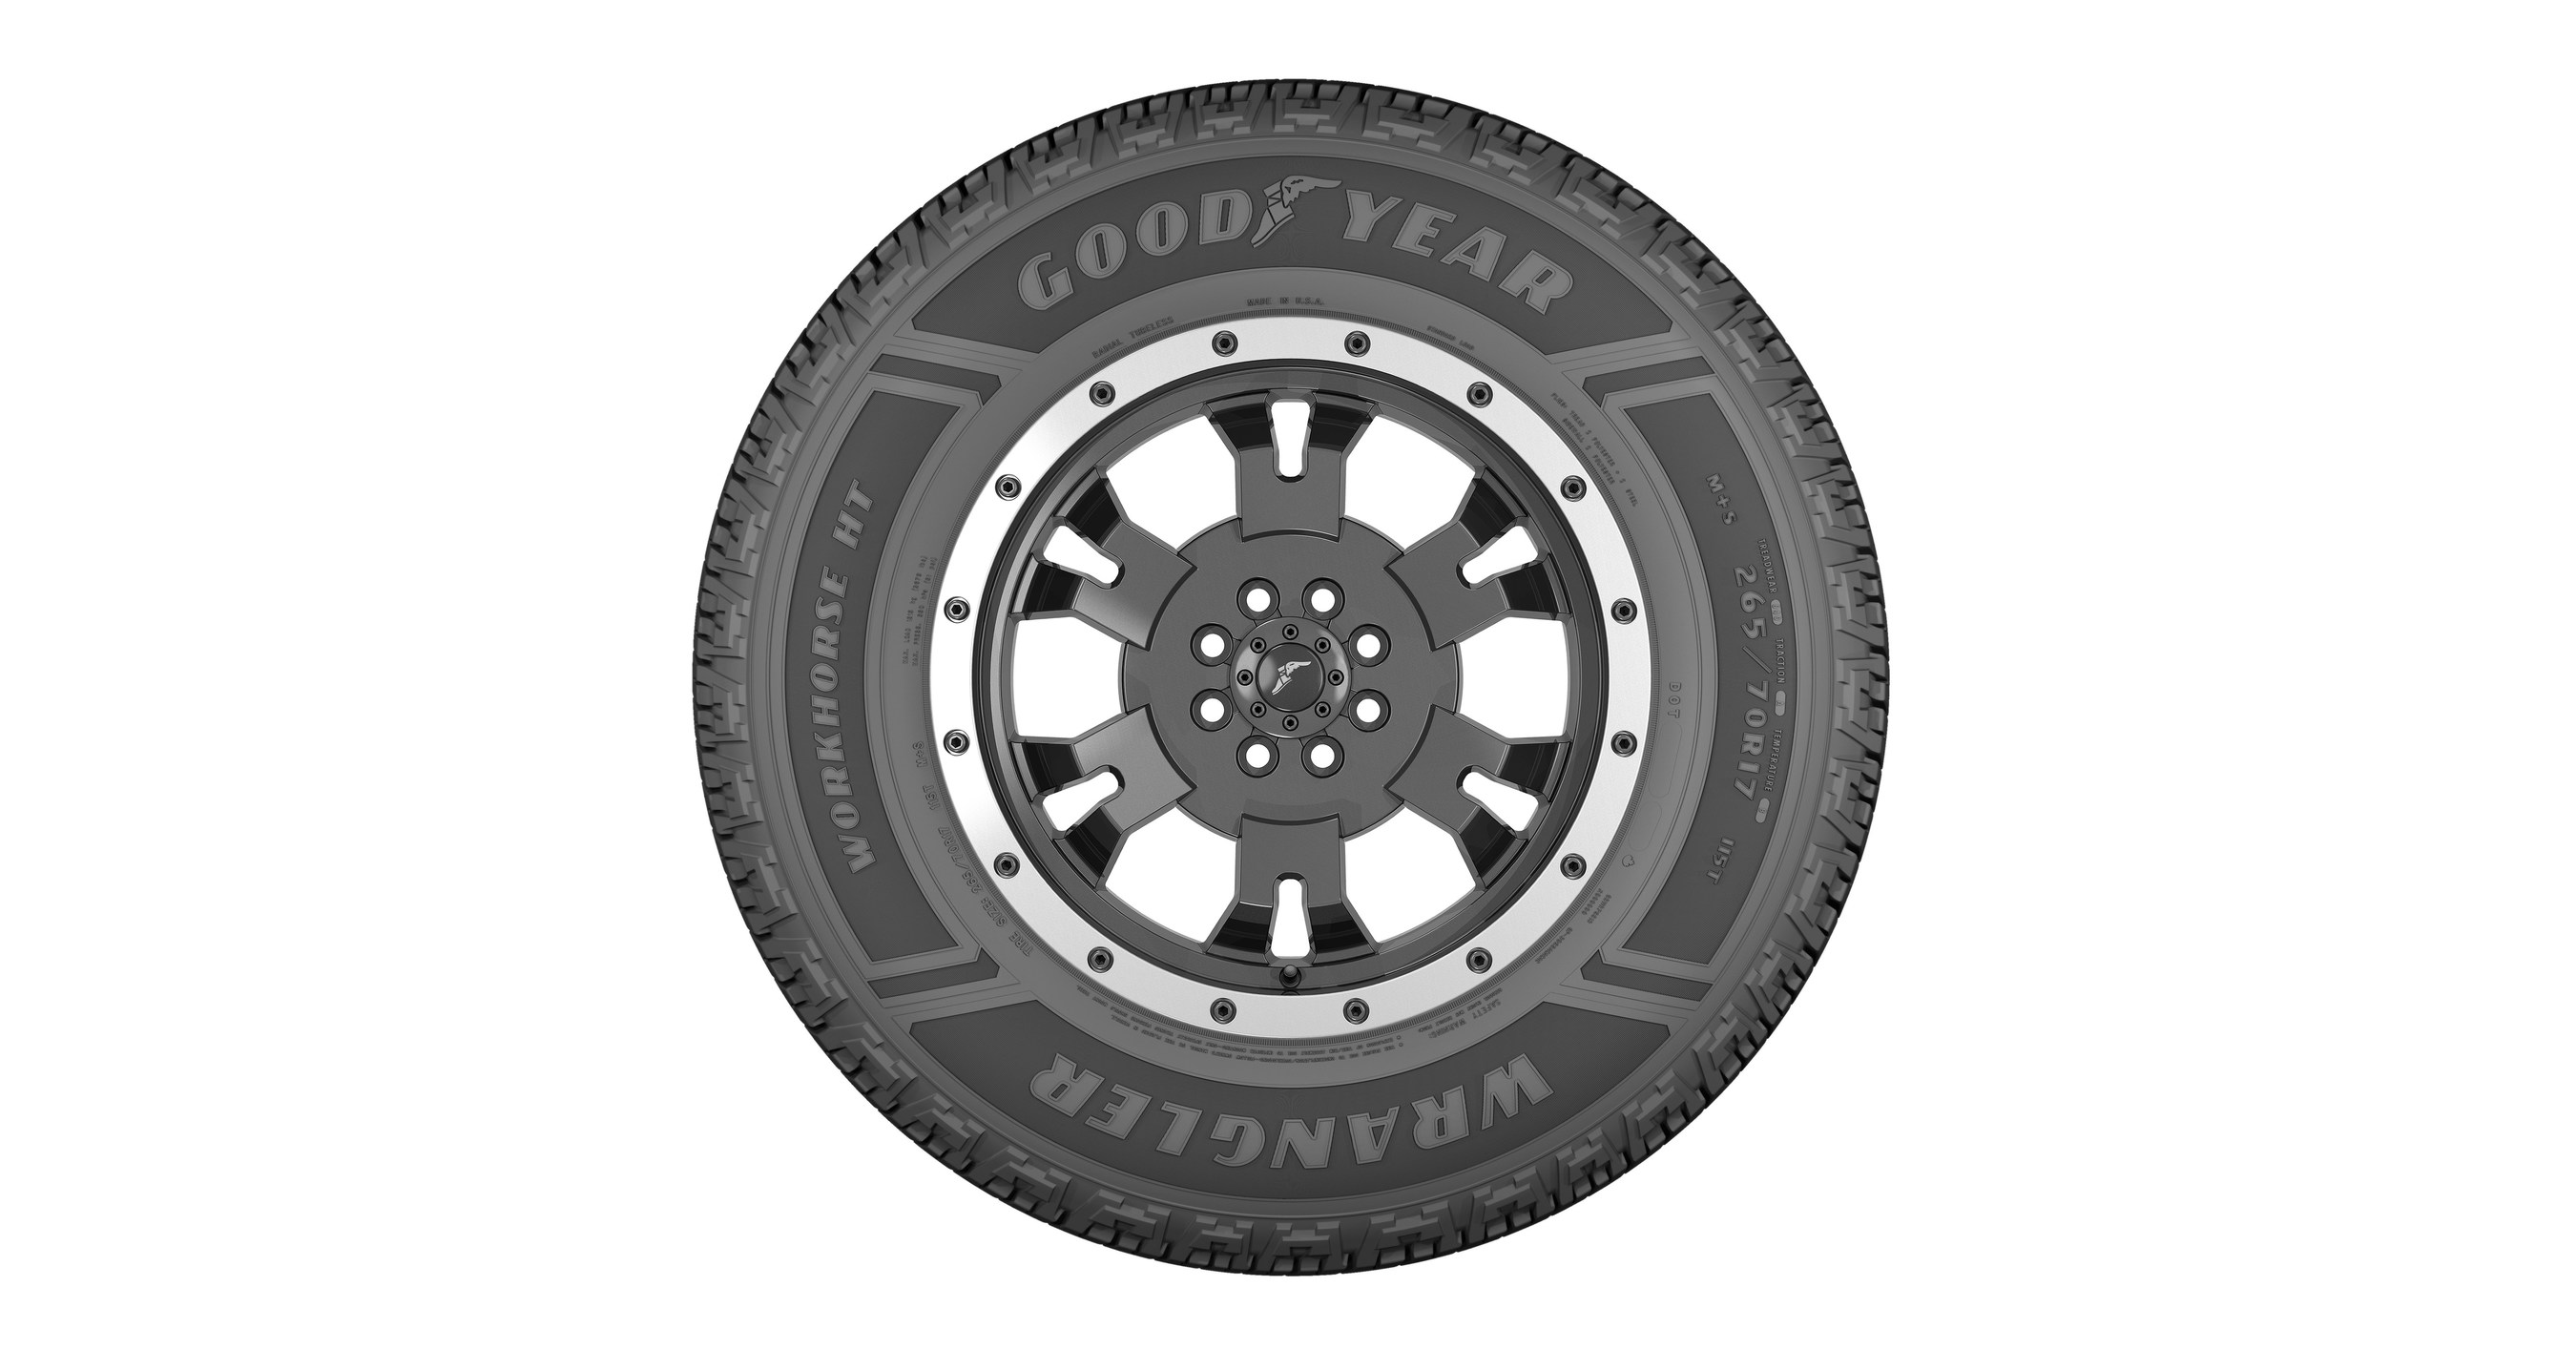 BUILT FOR THE LONG HAUL, NEW GOODYEAR WRANGLER HT TIRE DELIVERS ALL-SEASON  DEPENDABILITY